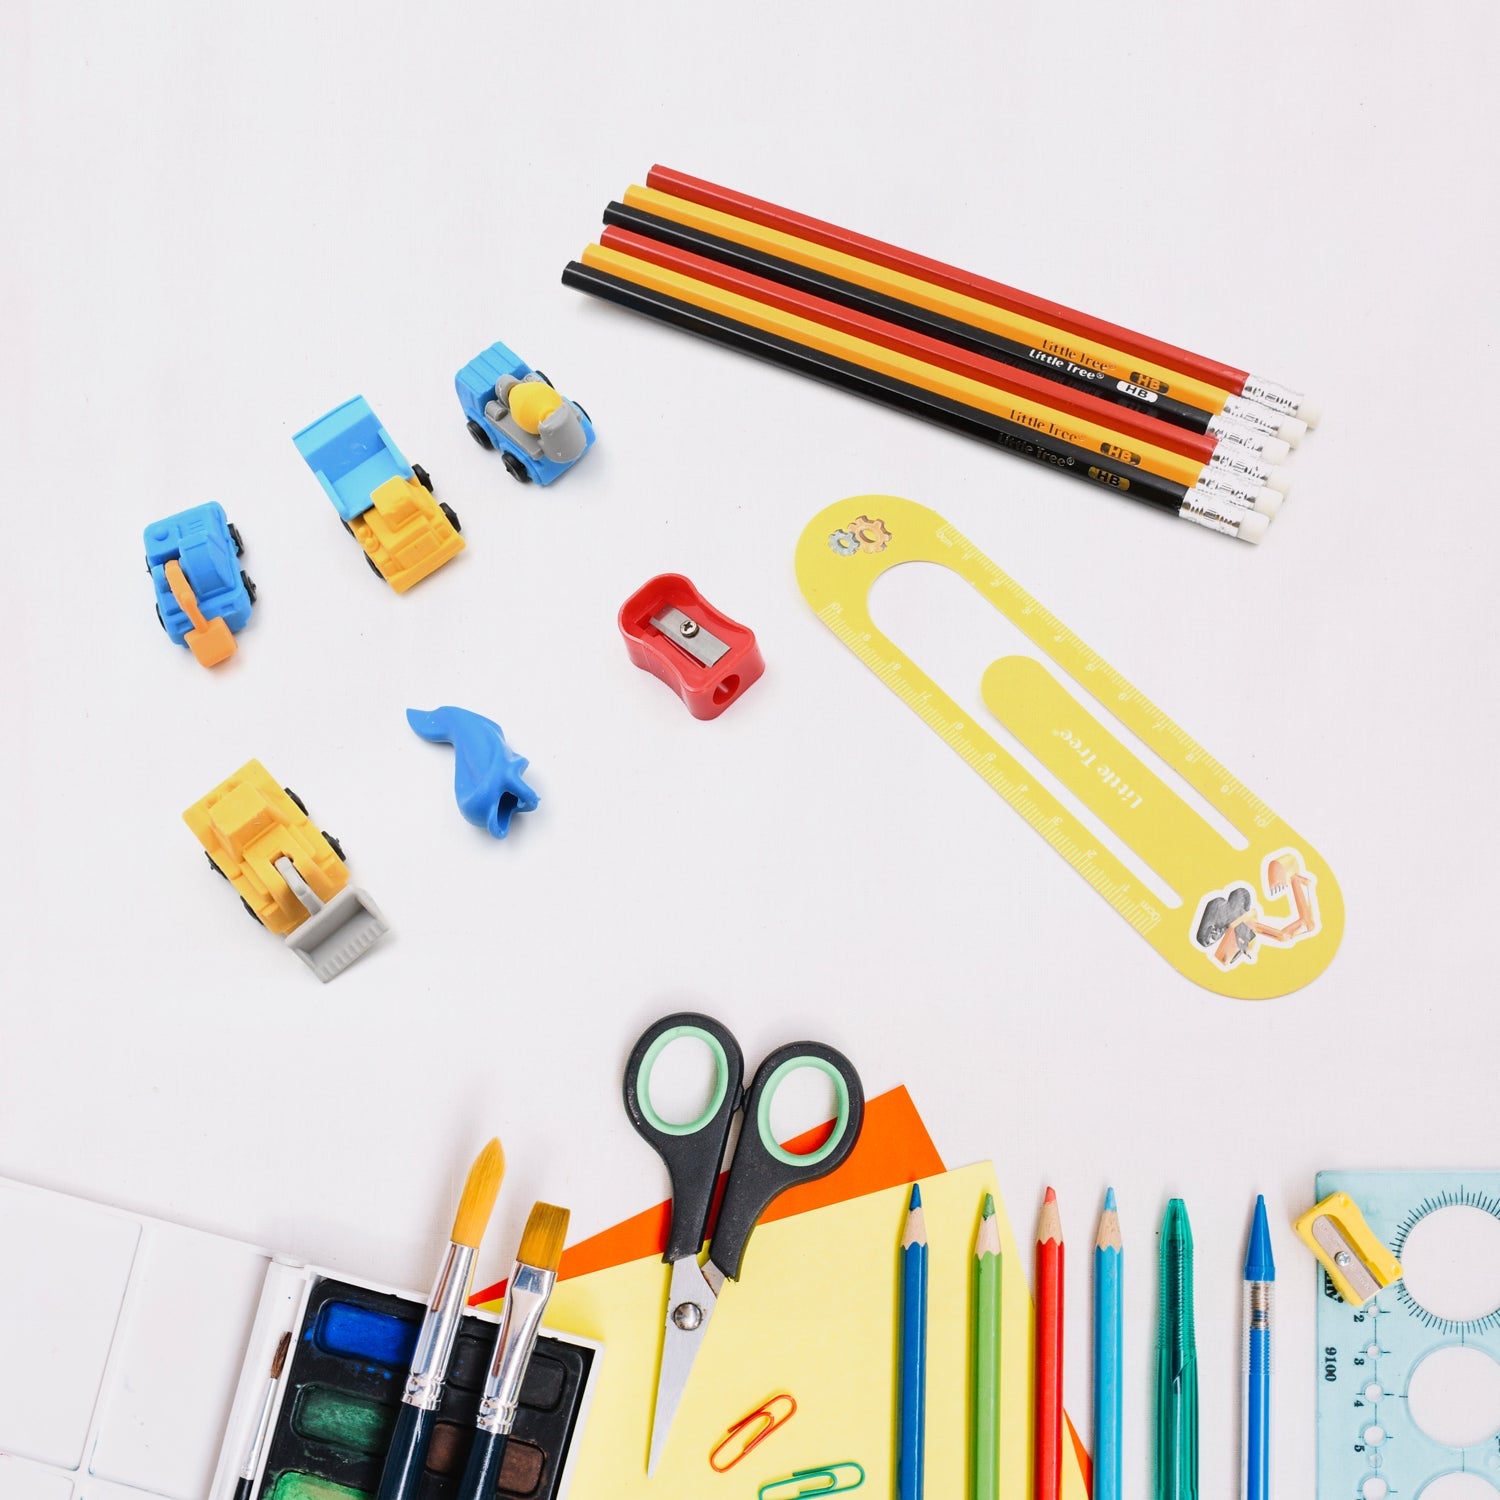 4547 Pencil and Eraser Set, Construction Truck Theme Stationery Kit Includes 6 Pencils, 4 Erasers, 1 Sharpener, 1 Ruler Bookmark, 1 Pencil Cap Stationary For Birthday Gifts for Kids, Birthday Return Gifts (13 Pc set)